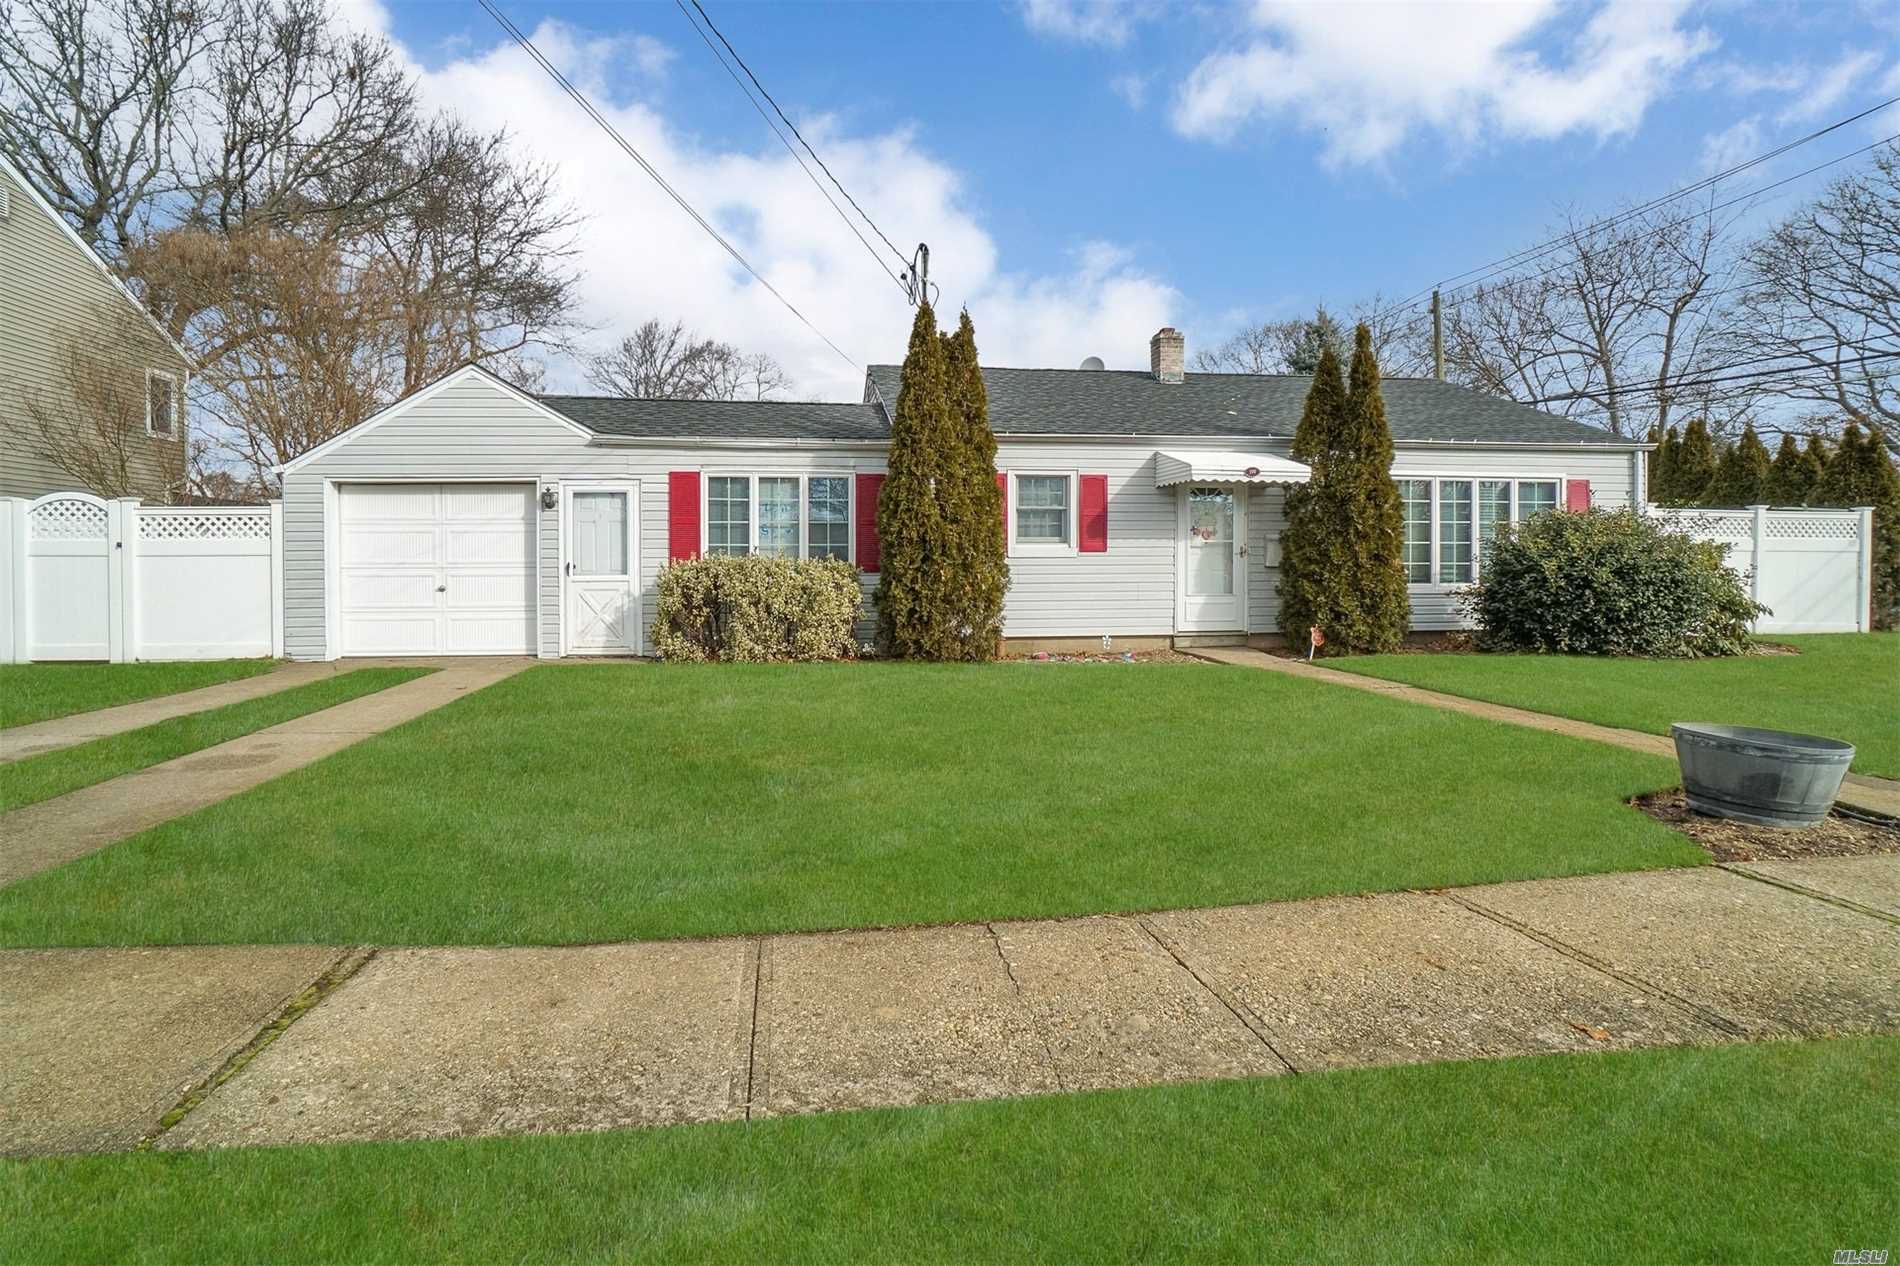 Beautifully Updated Ranch In The Heart Of Massapequa Park. Move In Ready Home With Many Updates: Roof - 6 Years Old, Floors - 6 Years Old, Boiler - 5 Years Old, Cac - 5 Years Old, Windows, Sliders And Electric Done In 2007. Close To Railroad And Village. A Must See, Will Not Last Long...